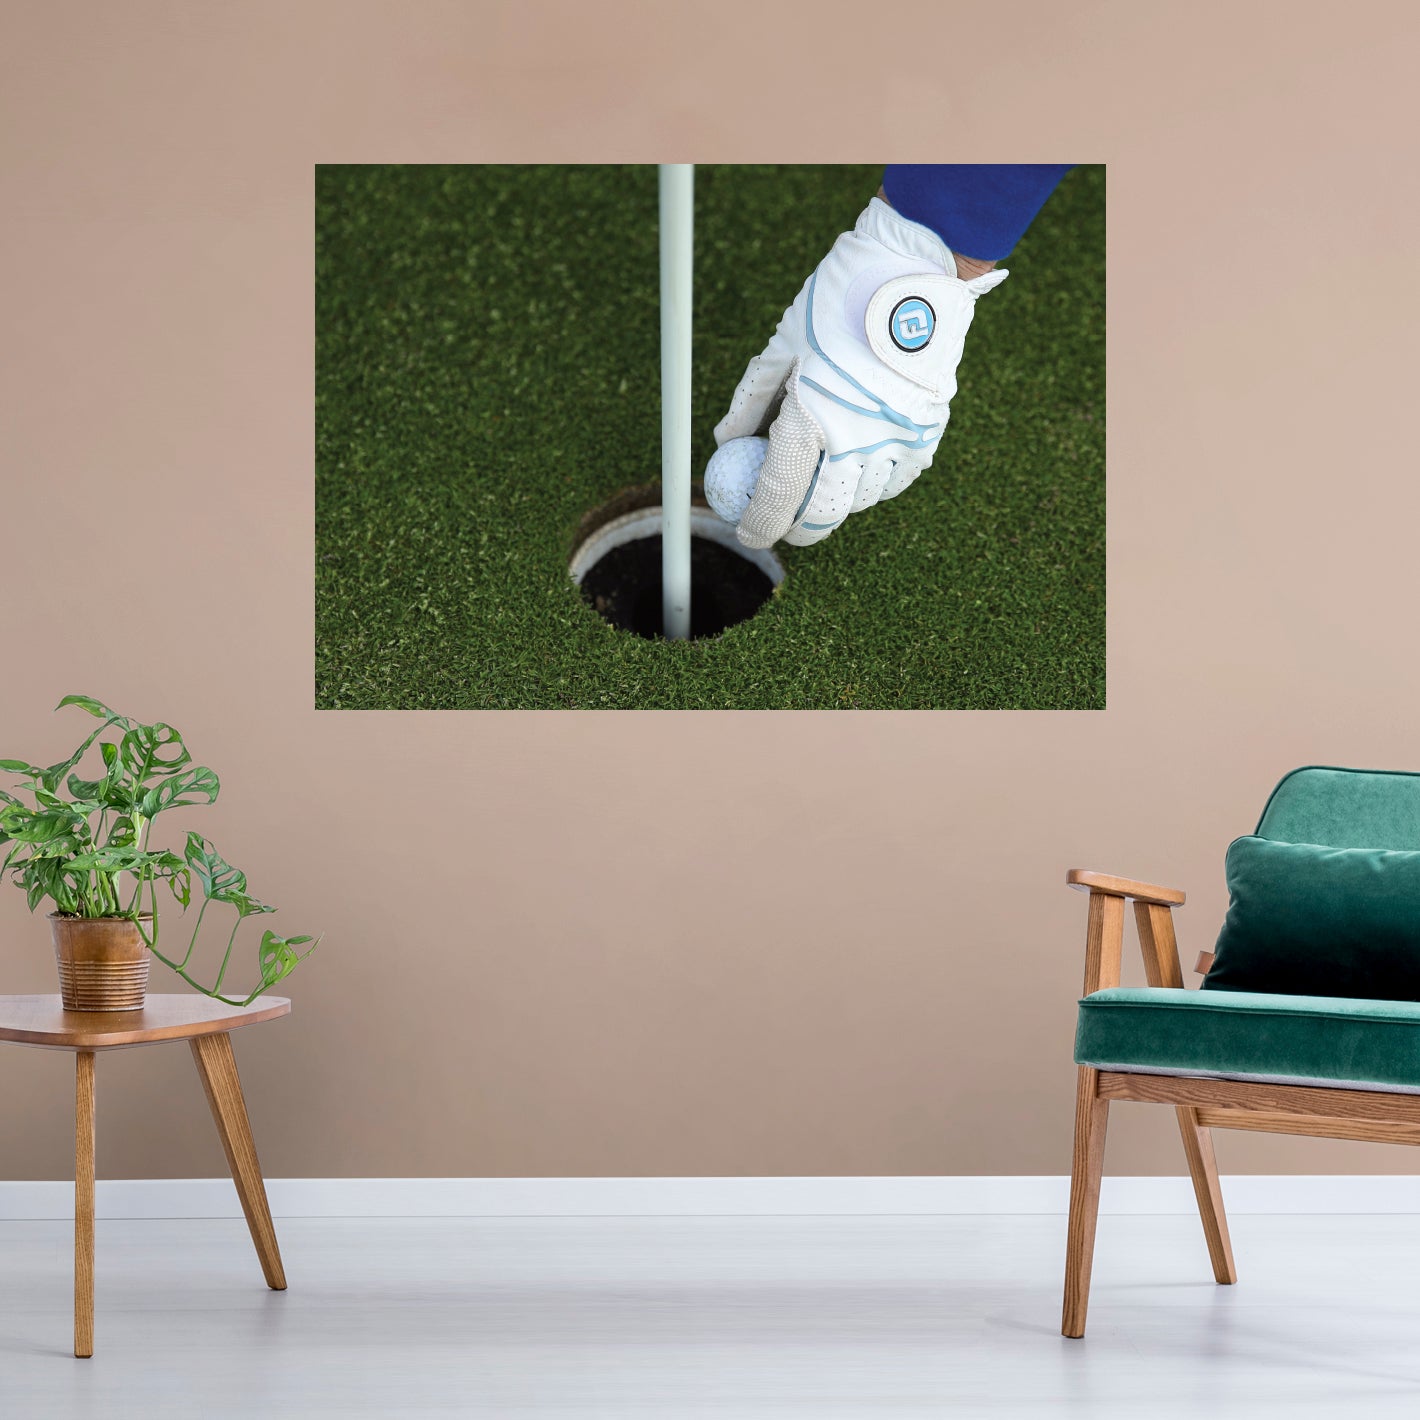 Golf: Glove Poster        -   Removable     Adhesive Decal